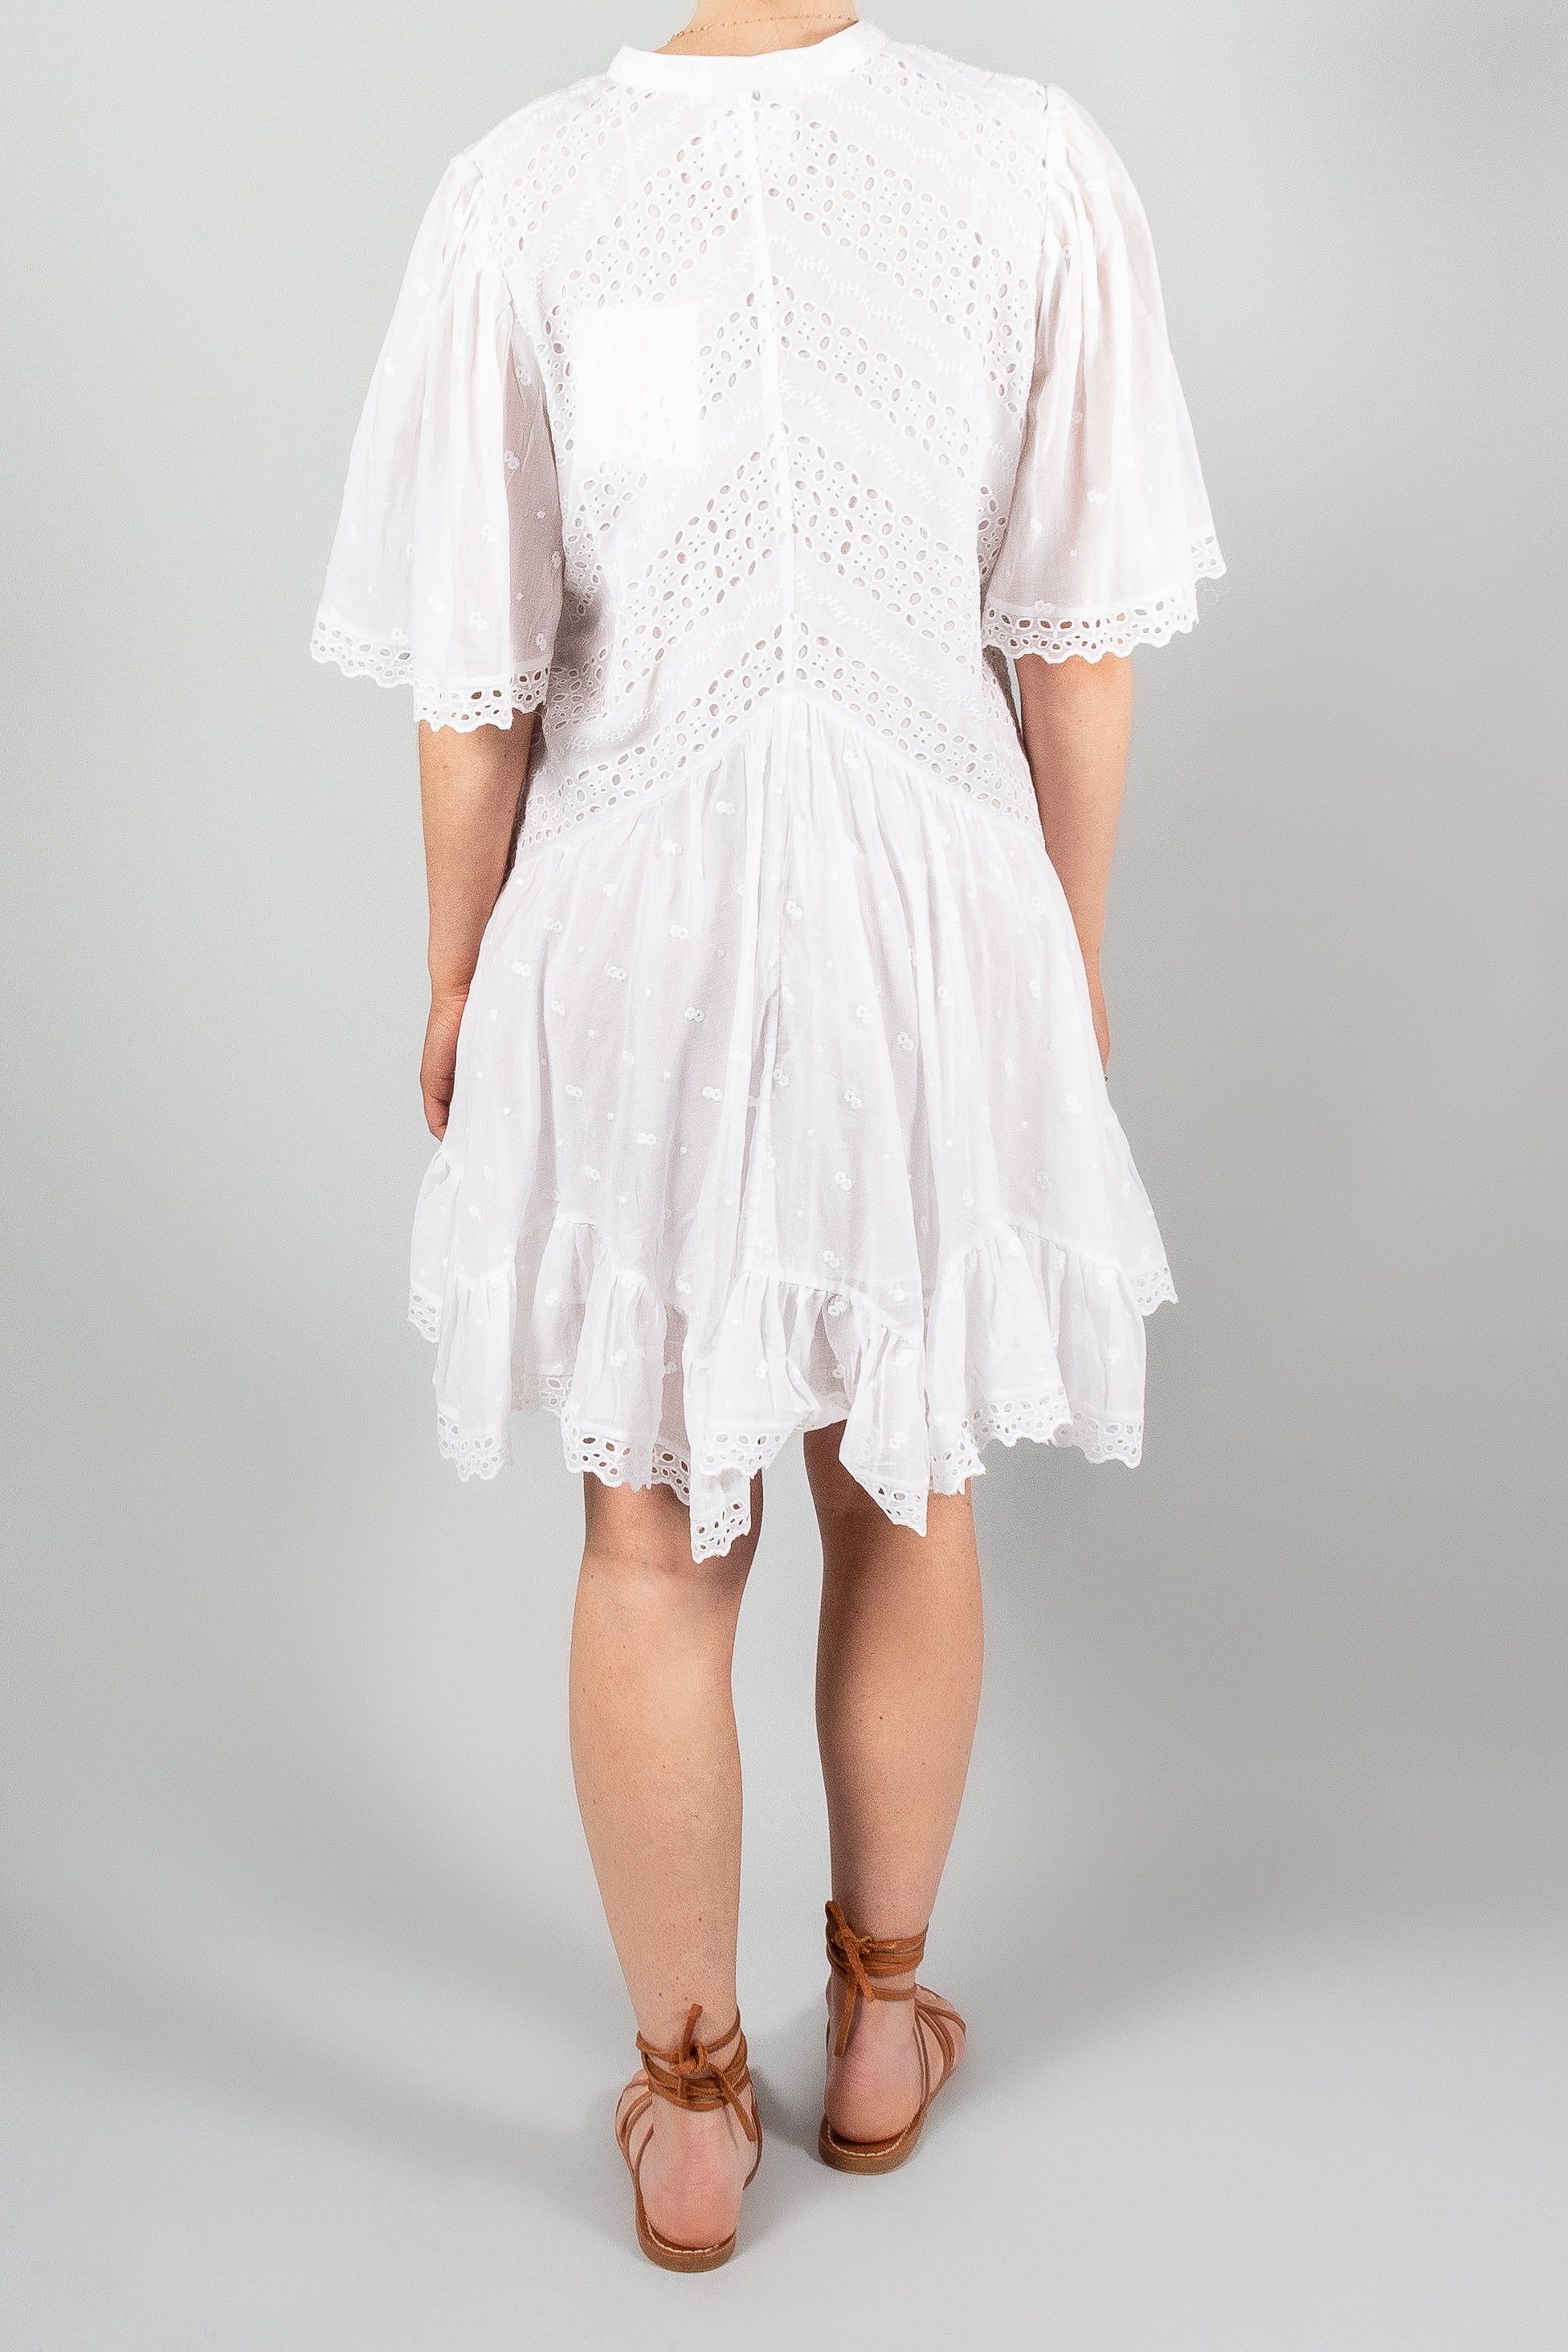 Isabel Marant Etoile Slayae Dress-Dresses and Jumpsuits-Misch-Boutique-Vancouver-Canada-misch.ca